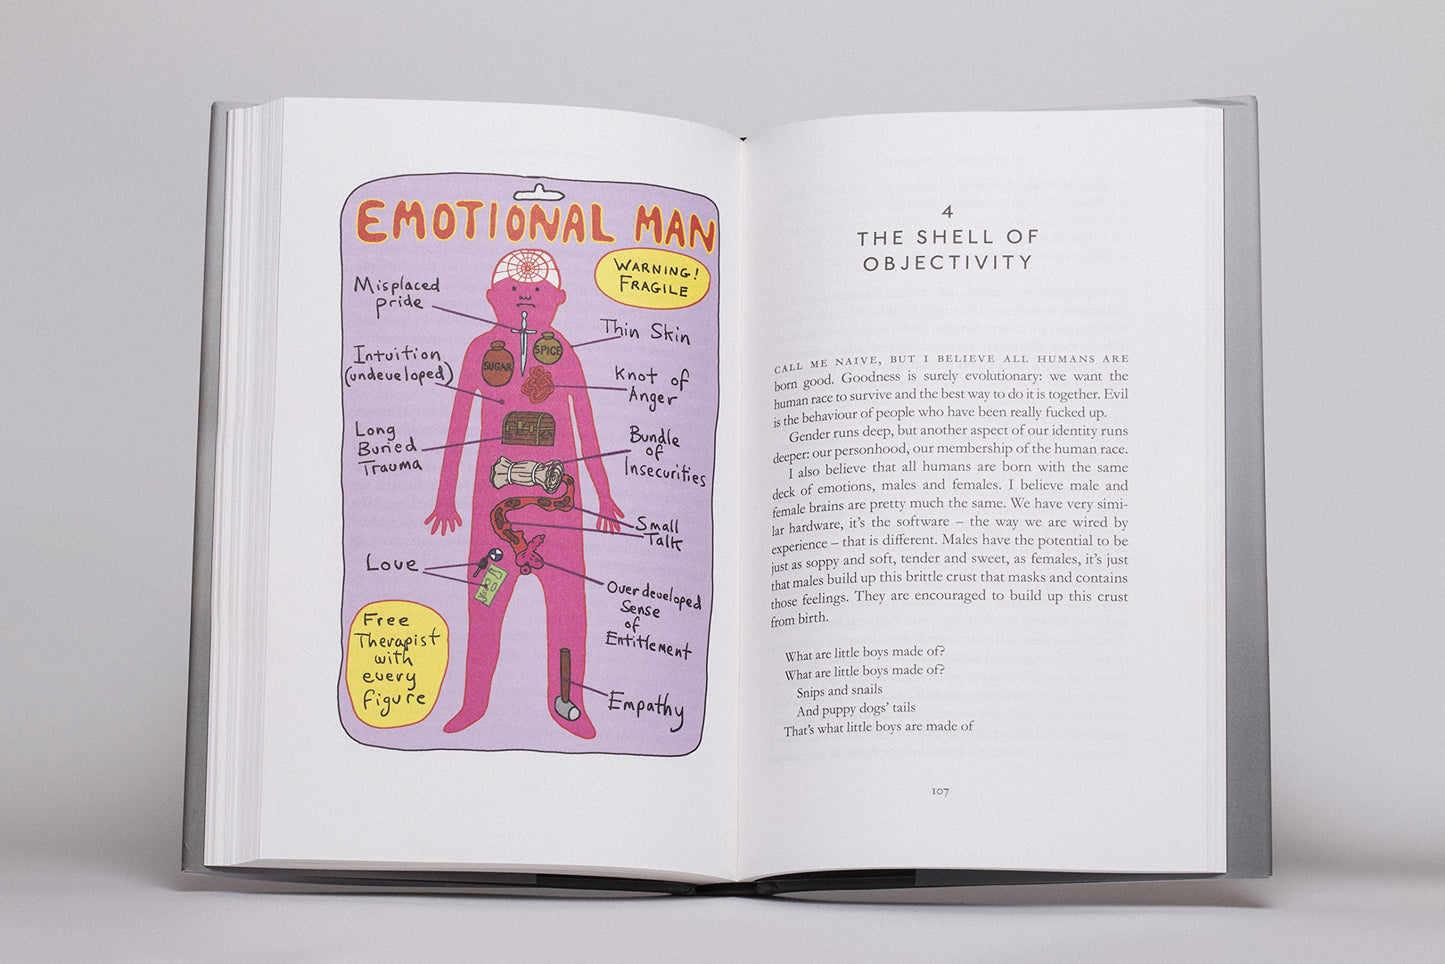 The Descent of Man - Grayson Perry